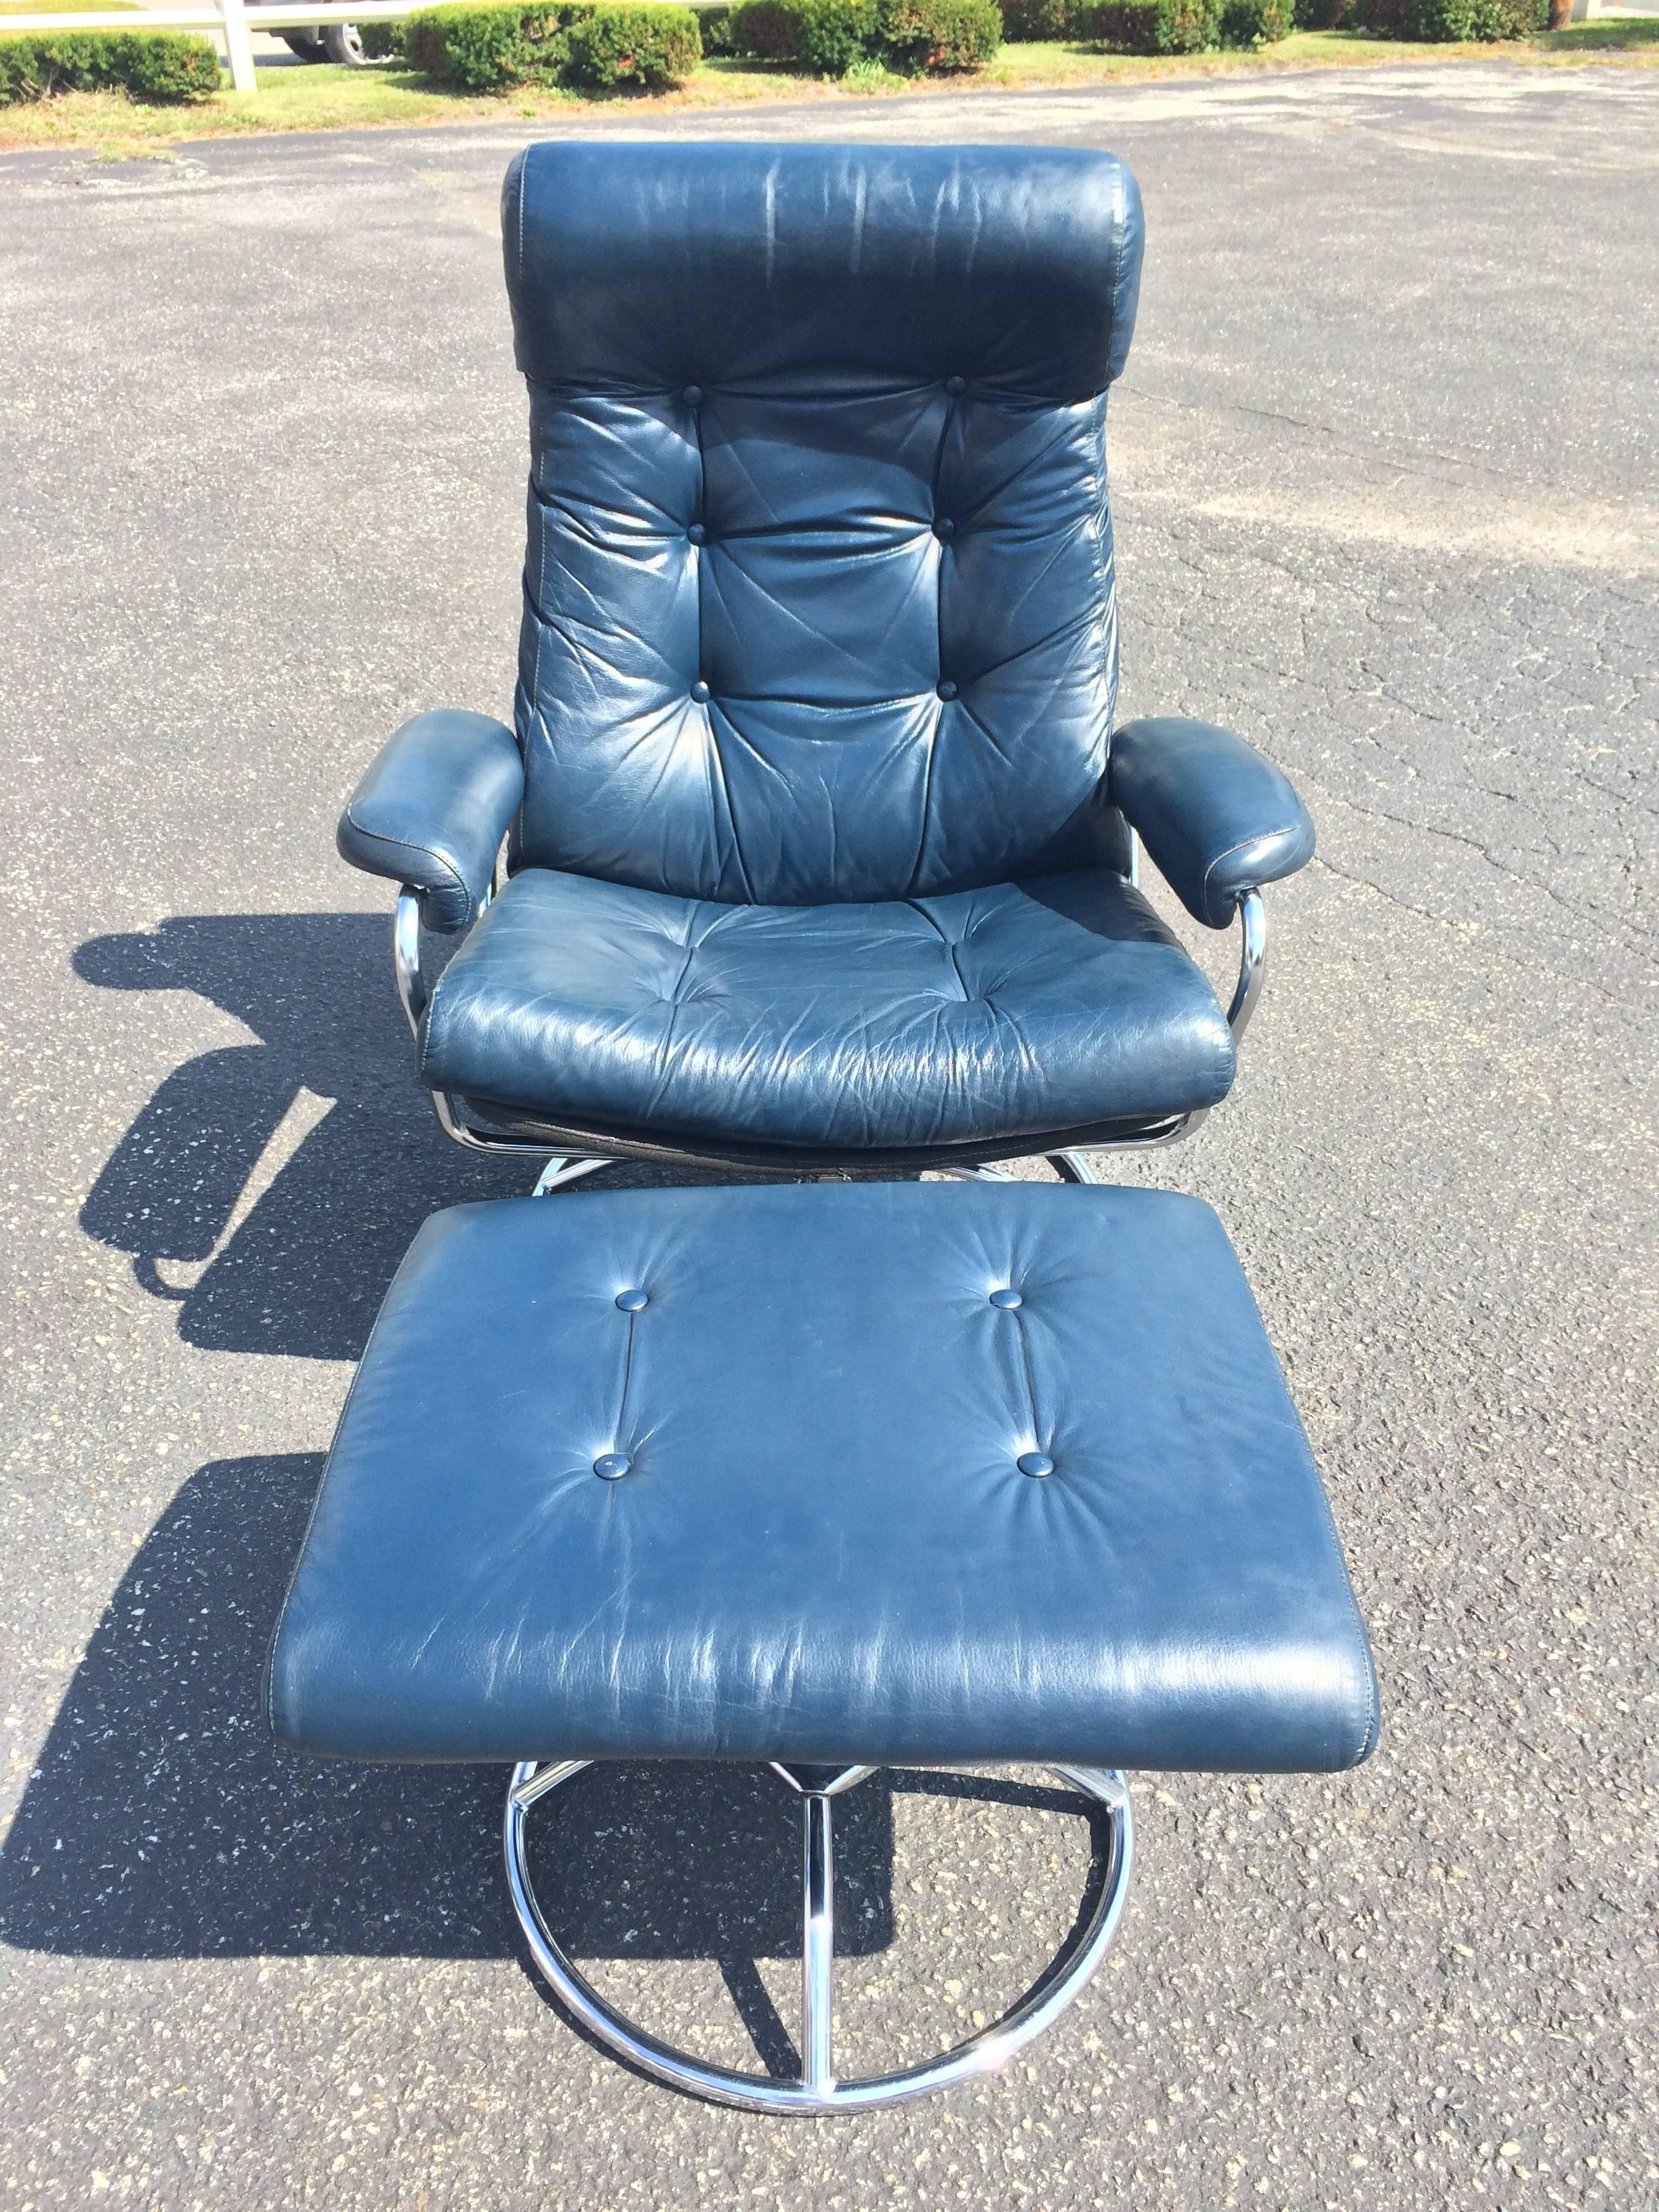 Recliner lounge chair and ottoman in navy blue. Recliner is adjustable from upright to full recline and swivels. This ergonomic recliner comes with matching ottoman. The backside of the recliner is covered in a canvas upholstery. The recliner back